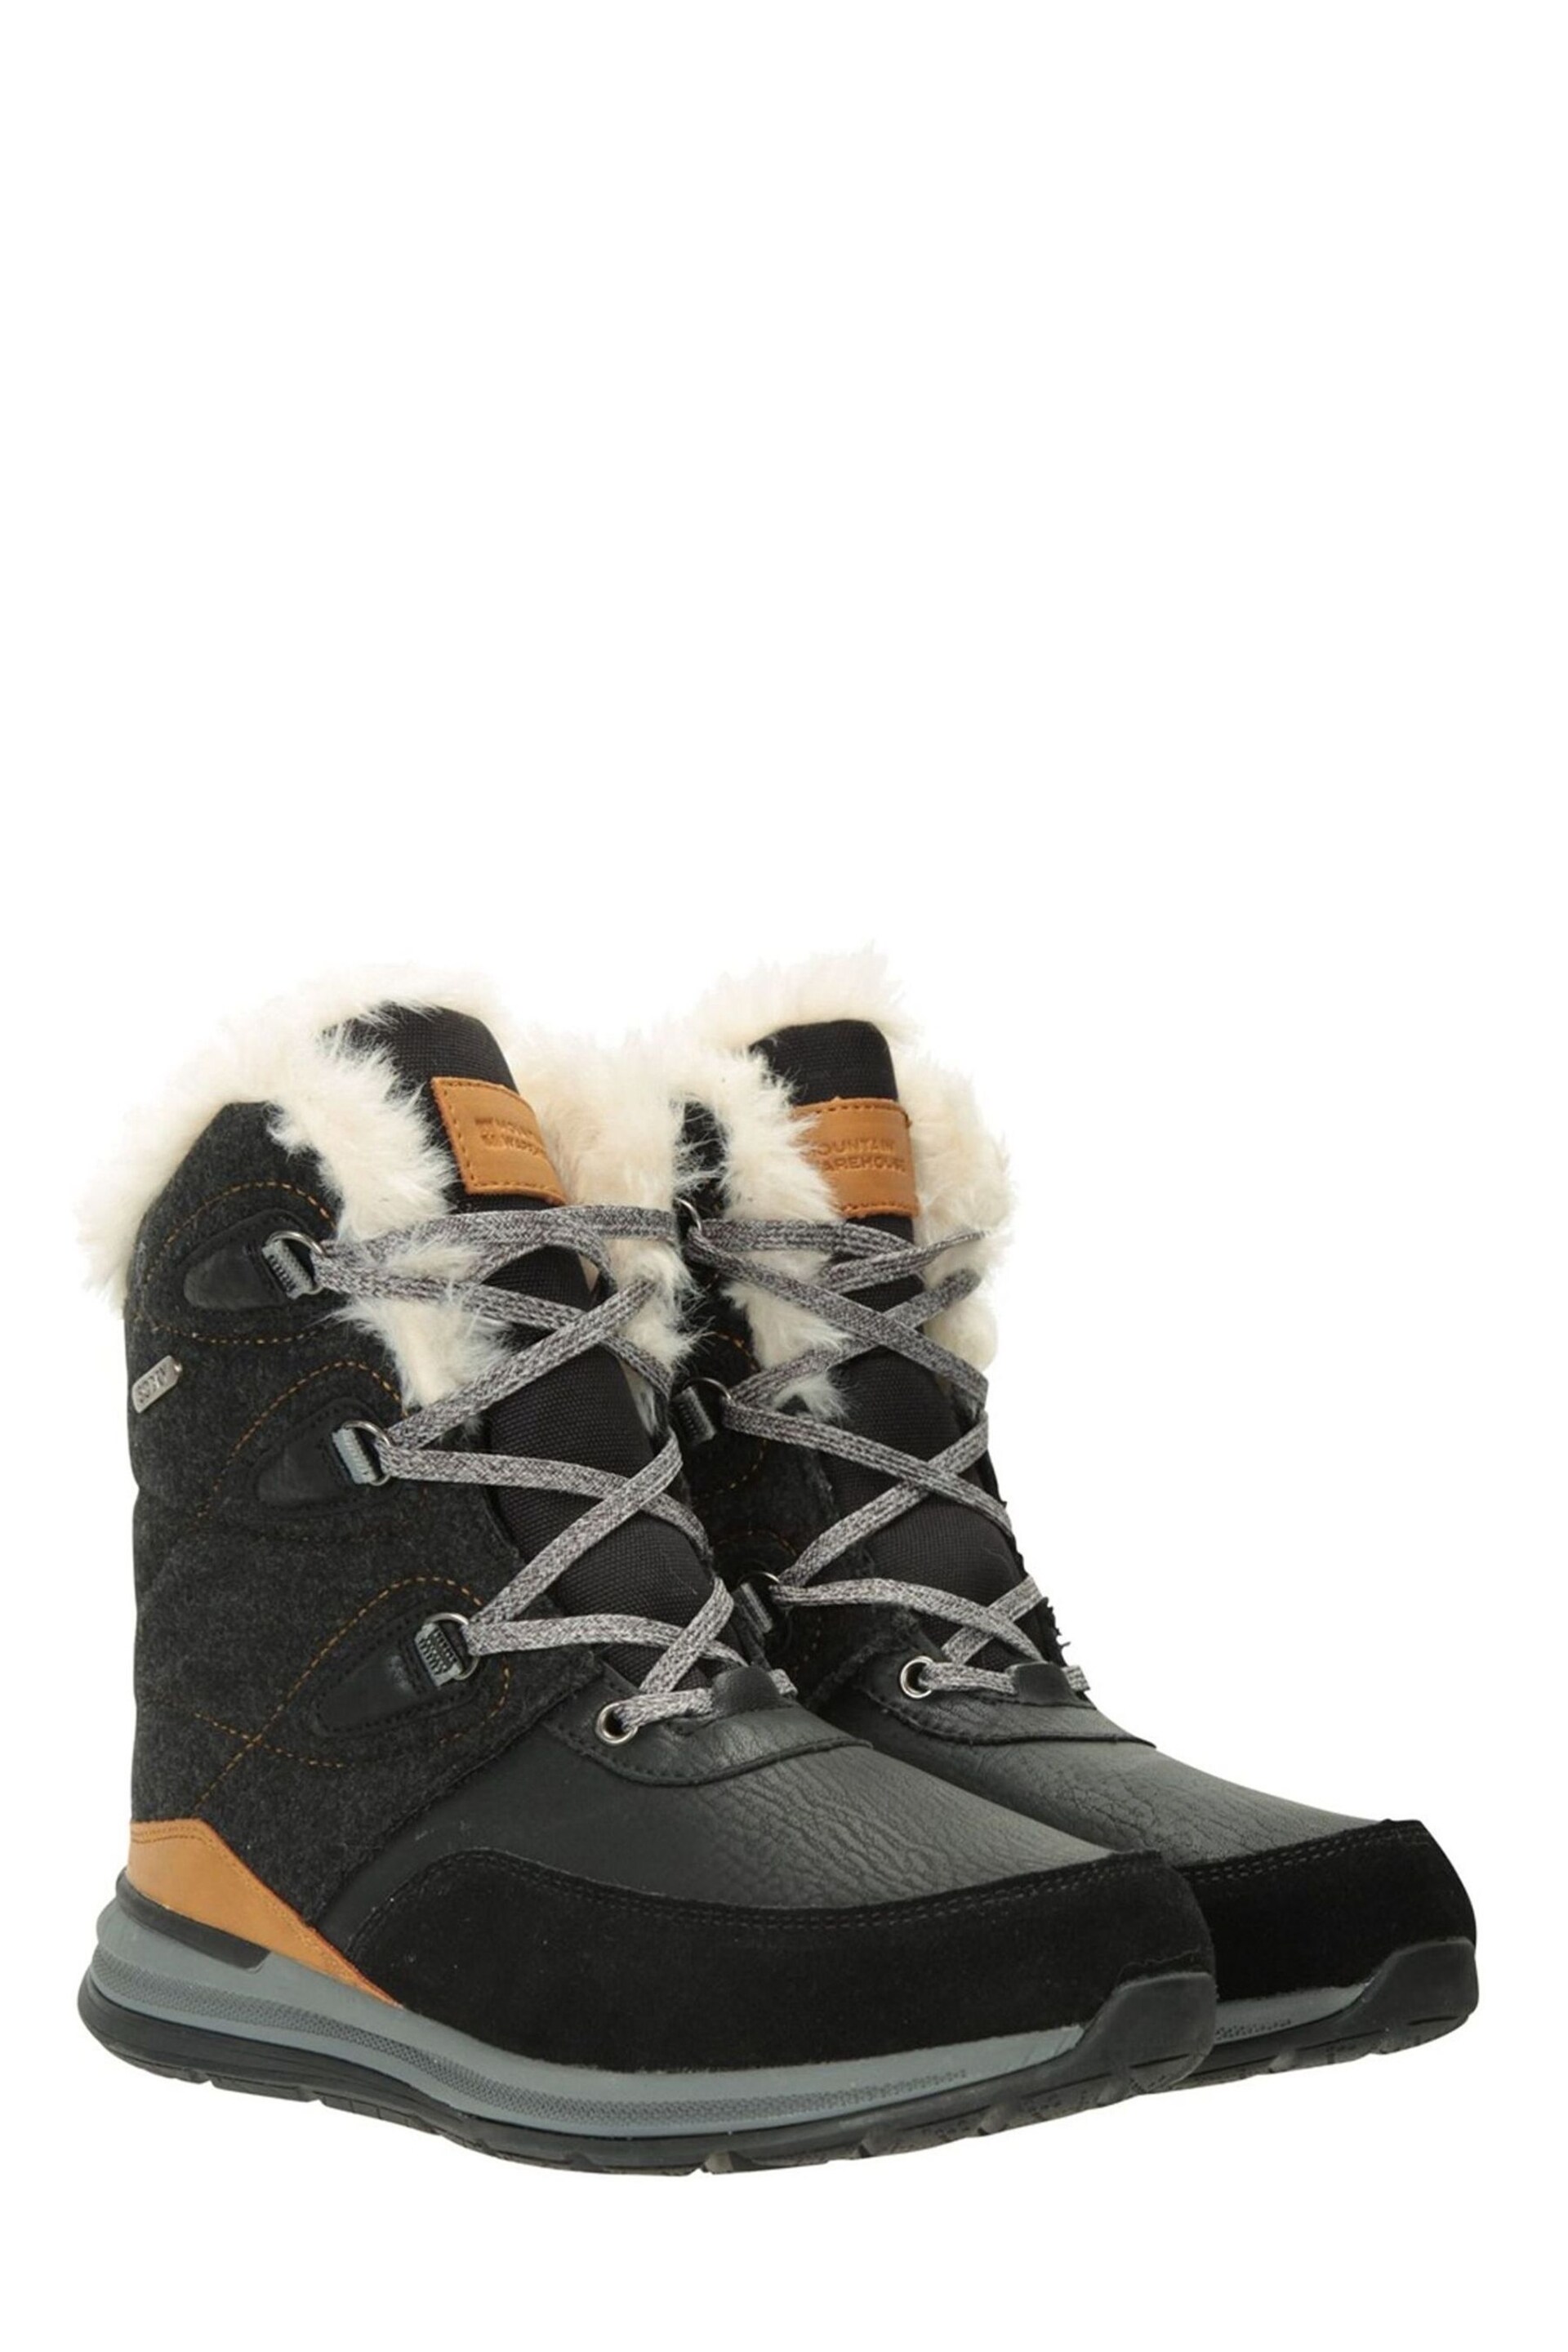 Mountain Warehouse Brown Brown Ice Crystal Womens Waterproof Snow Walking Boots - Image 1 of 5